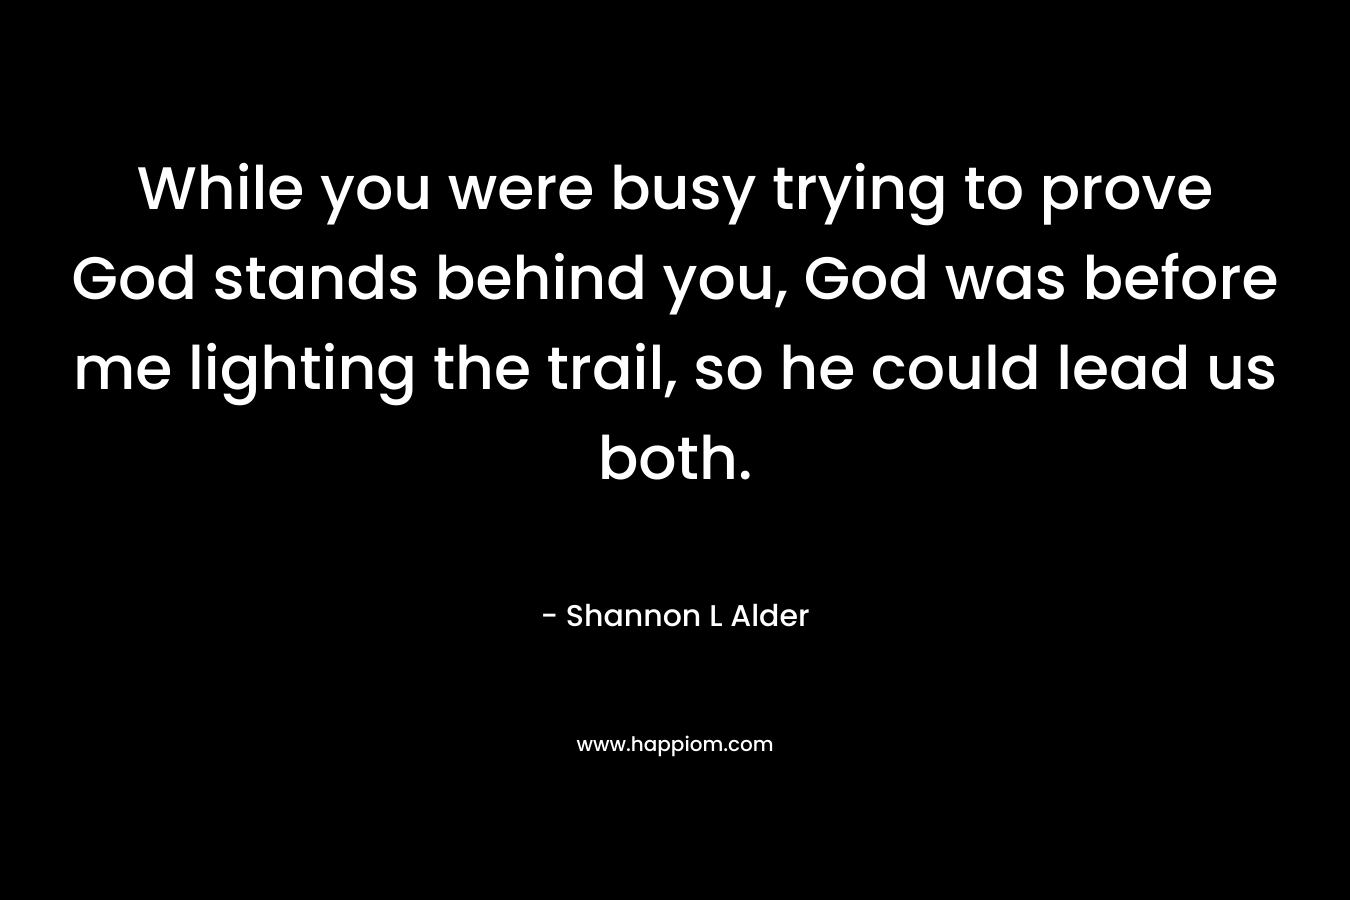 While you were busy trying to prove God stands behind you, God was before me lighting the trail, so he could lead us both. – Shannon L Alder